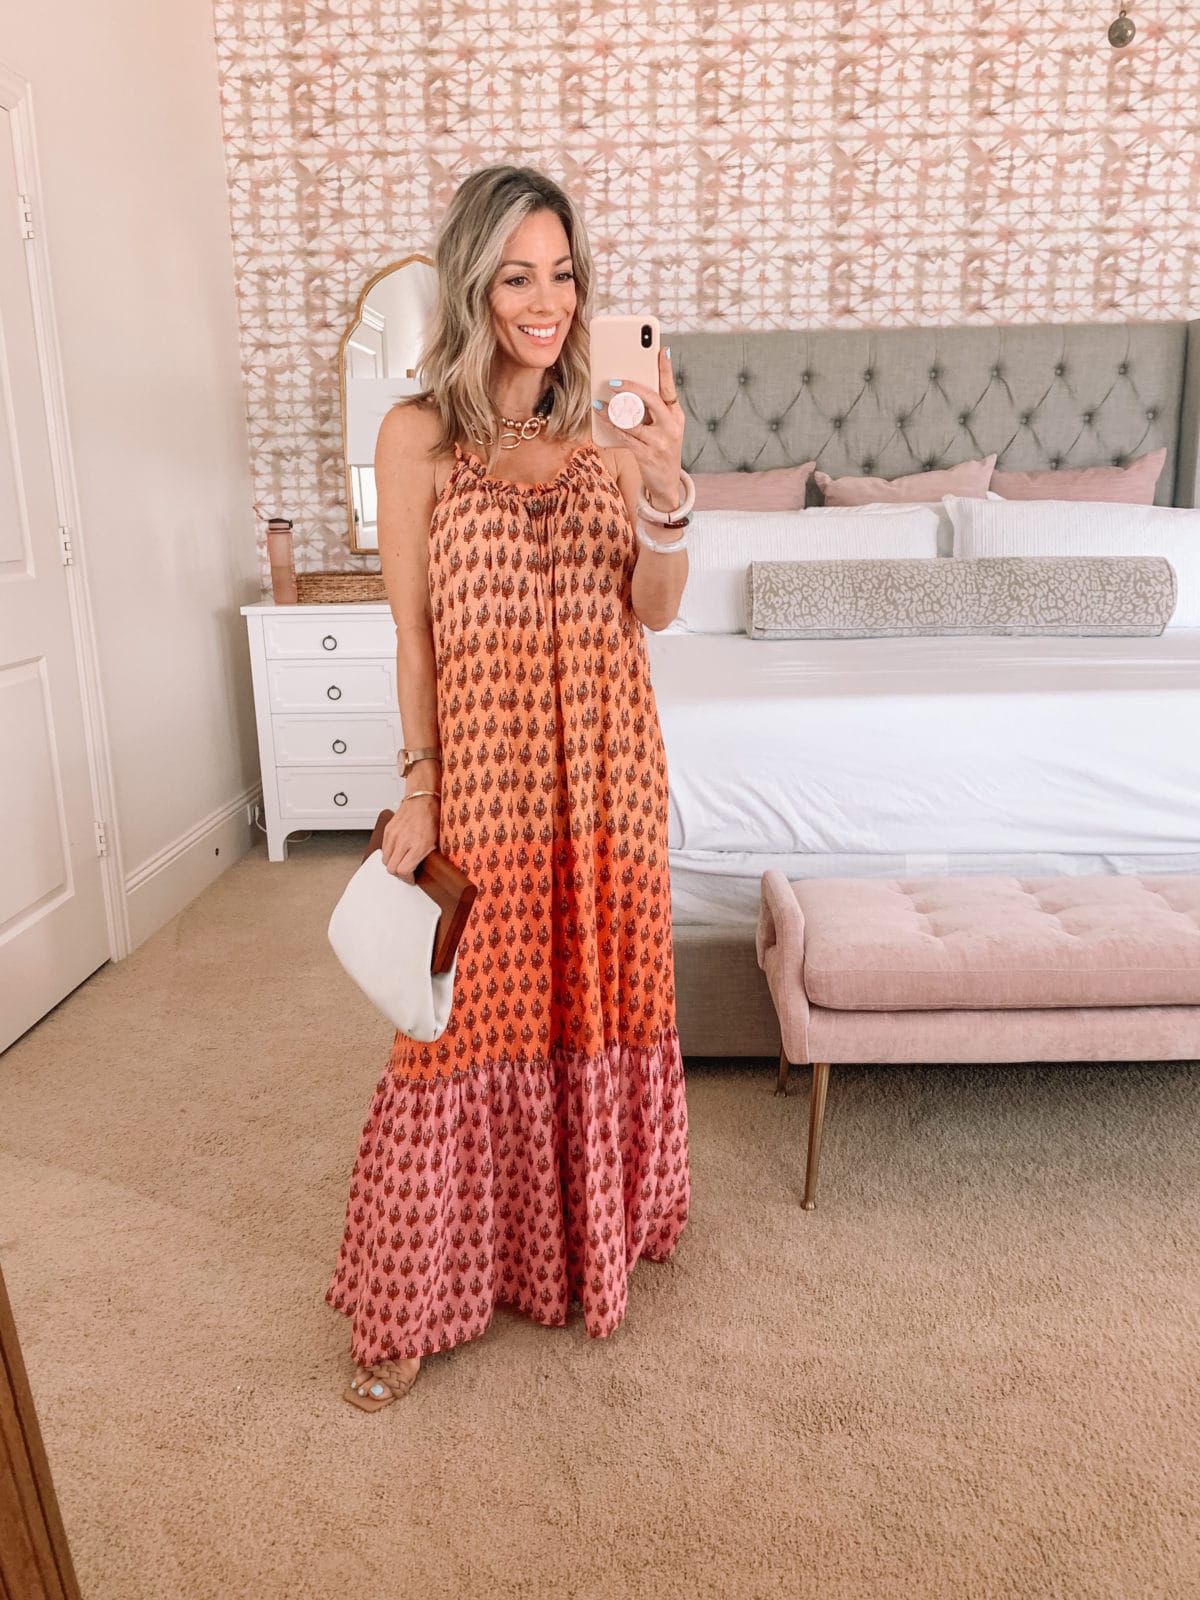 Dressing Room Finds, Maxi Dress and Clutch 